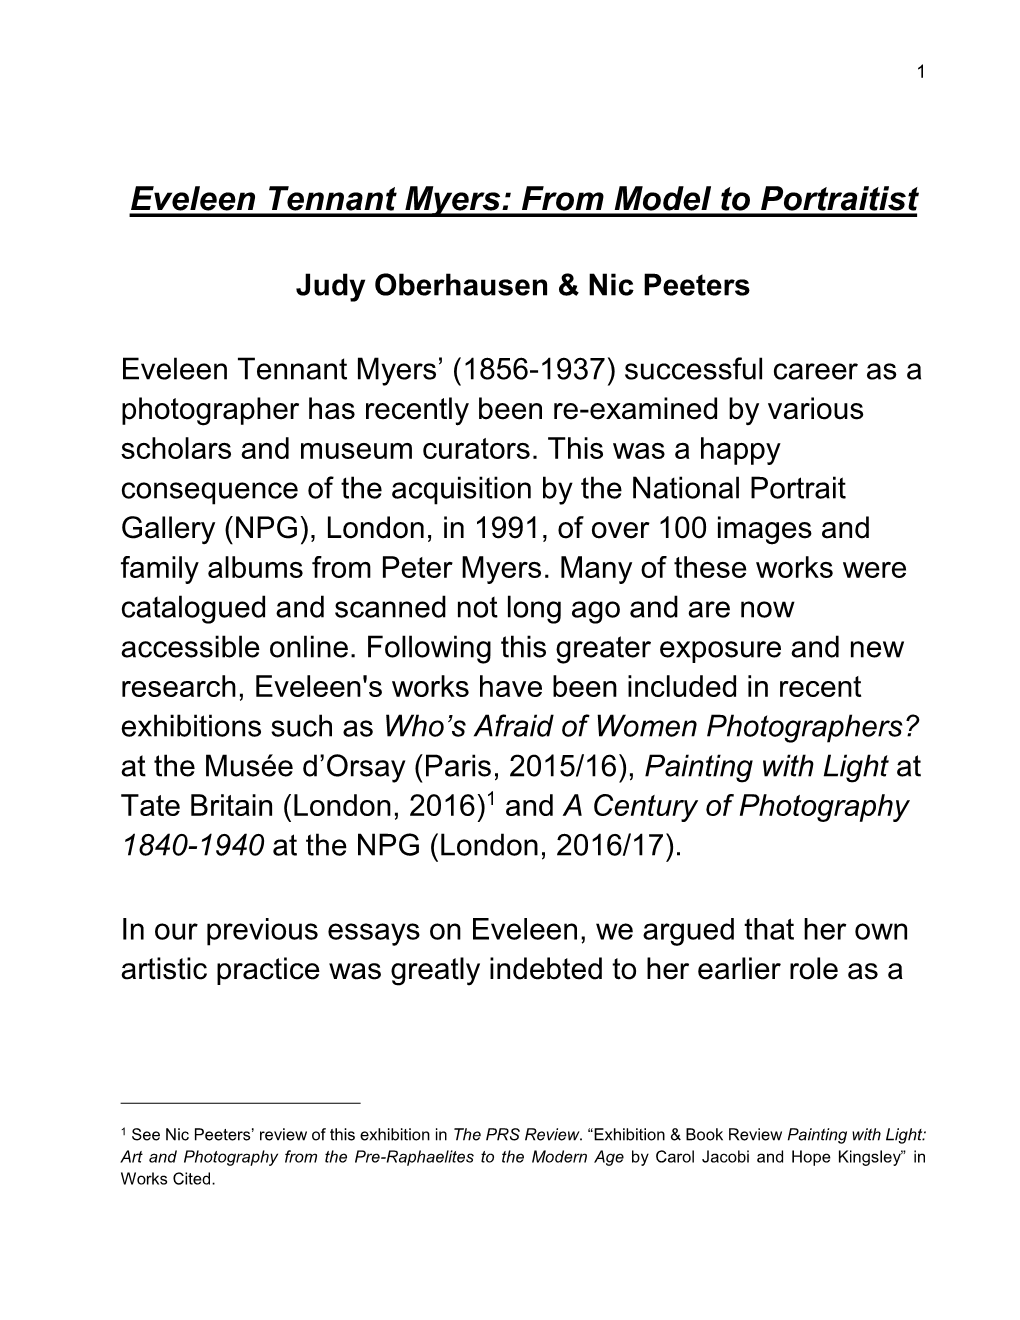 Eveleen Tennant Myers: from Model to Portraitist